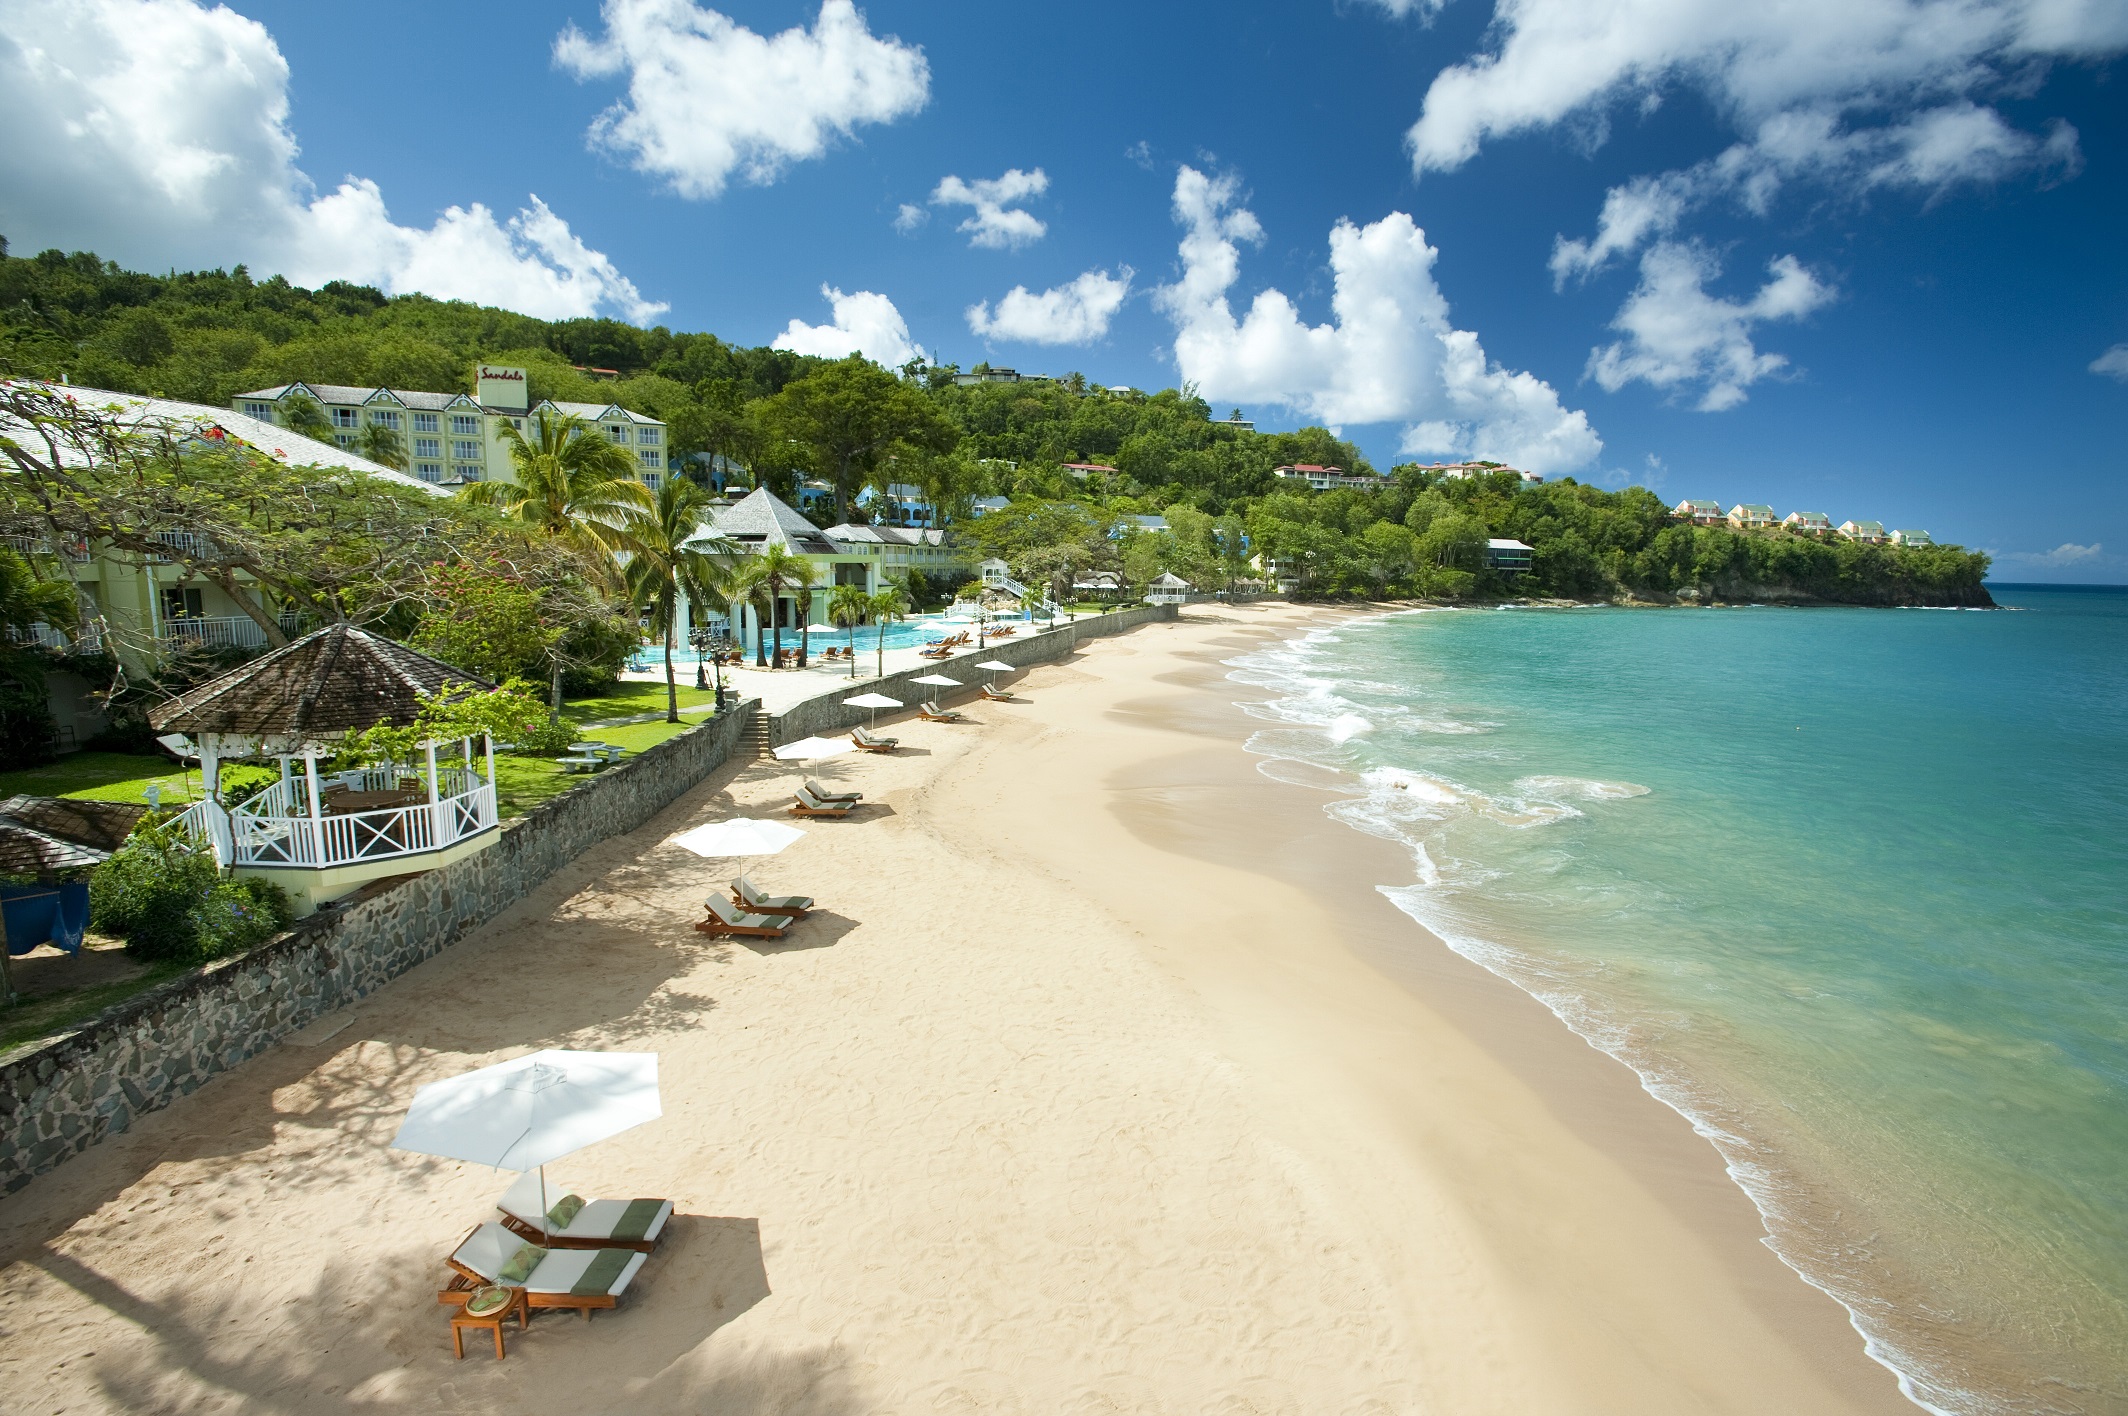 Caribbean holidays: 10 delicious reasons to visit St Lucia | Metro News